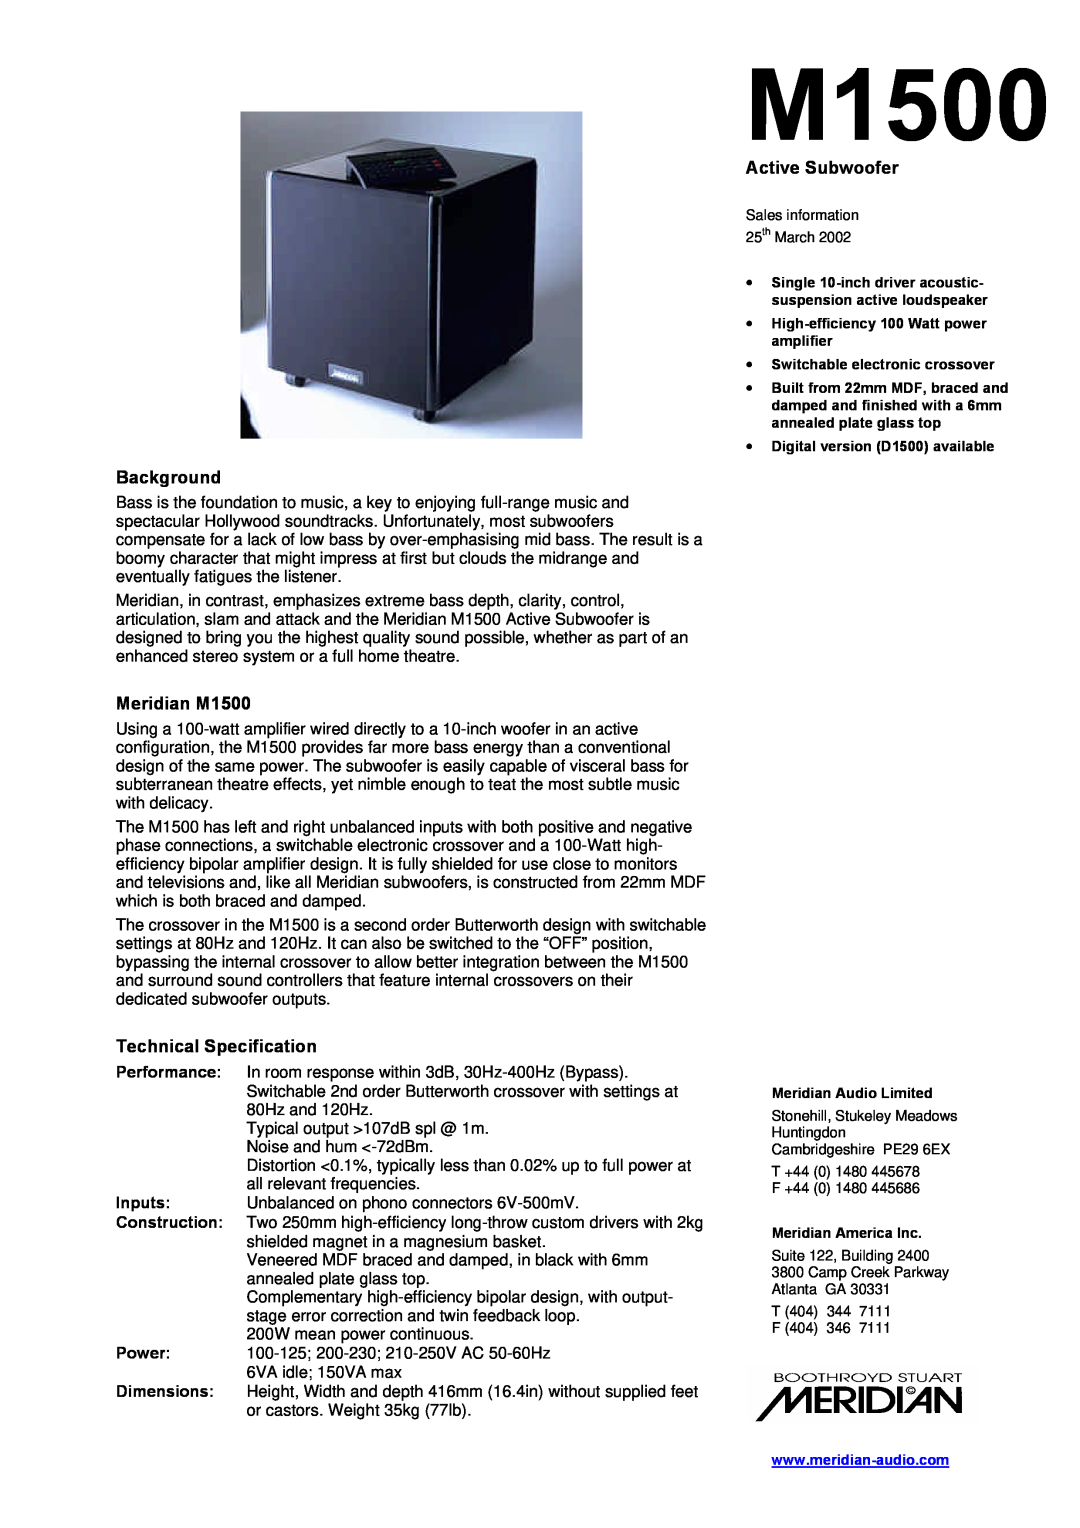 Meridian America dimensions Active Subwoofer, Background, Meridian M1500, Technical Specification 